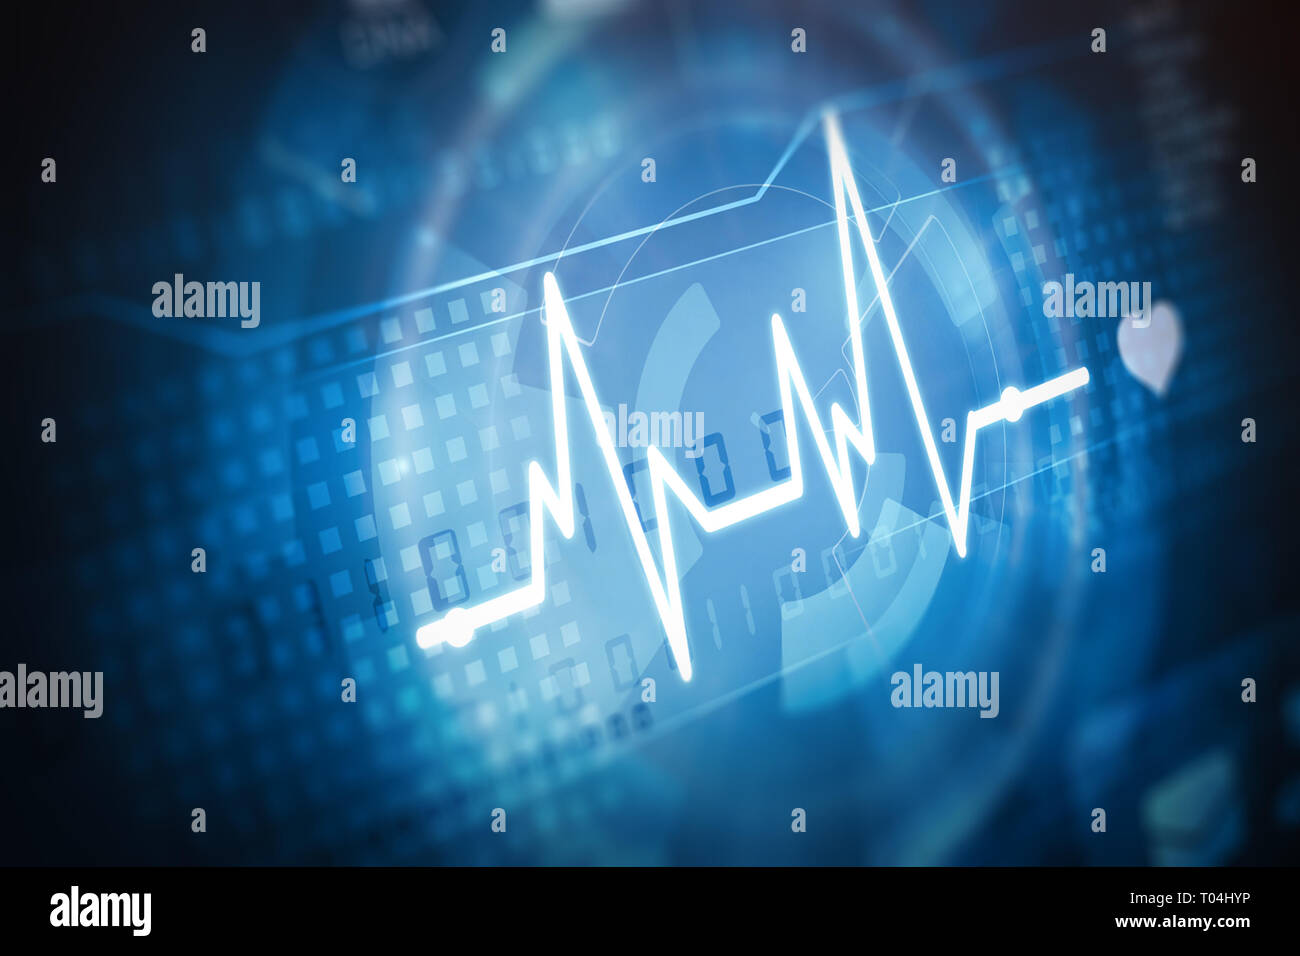 heart pulse diagram on blue technology background. medical innovation and healthcare concept. Stock Photo